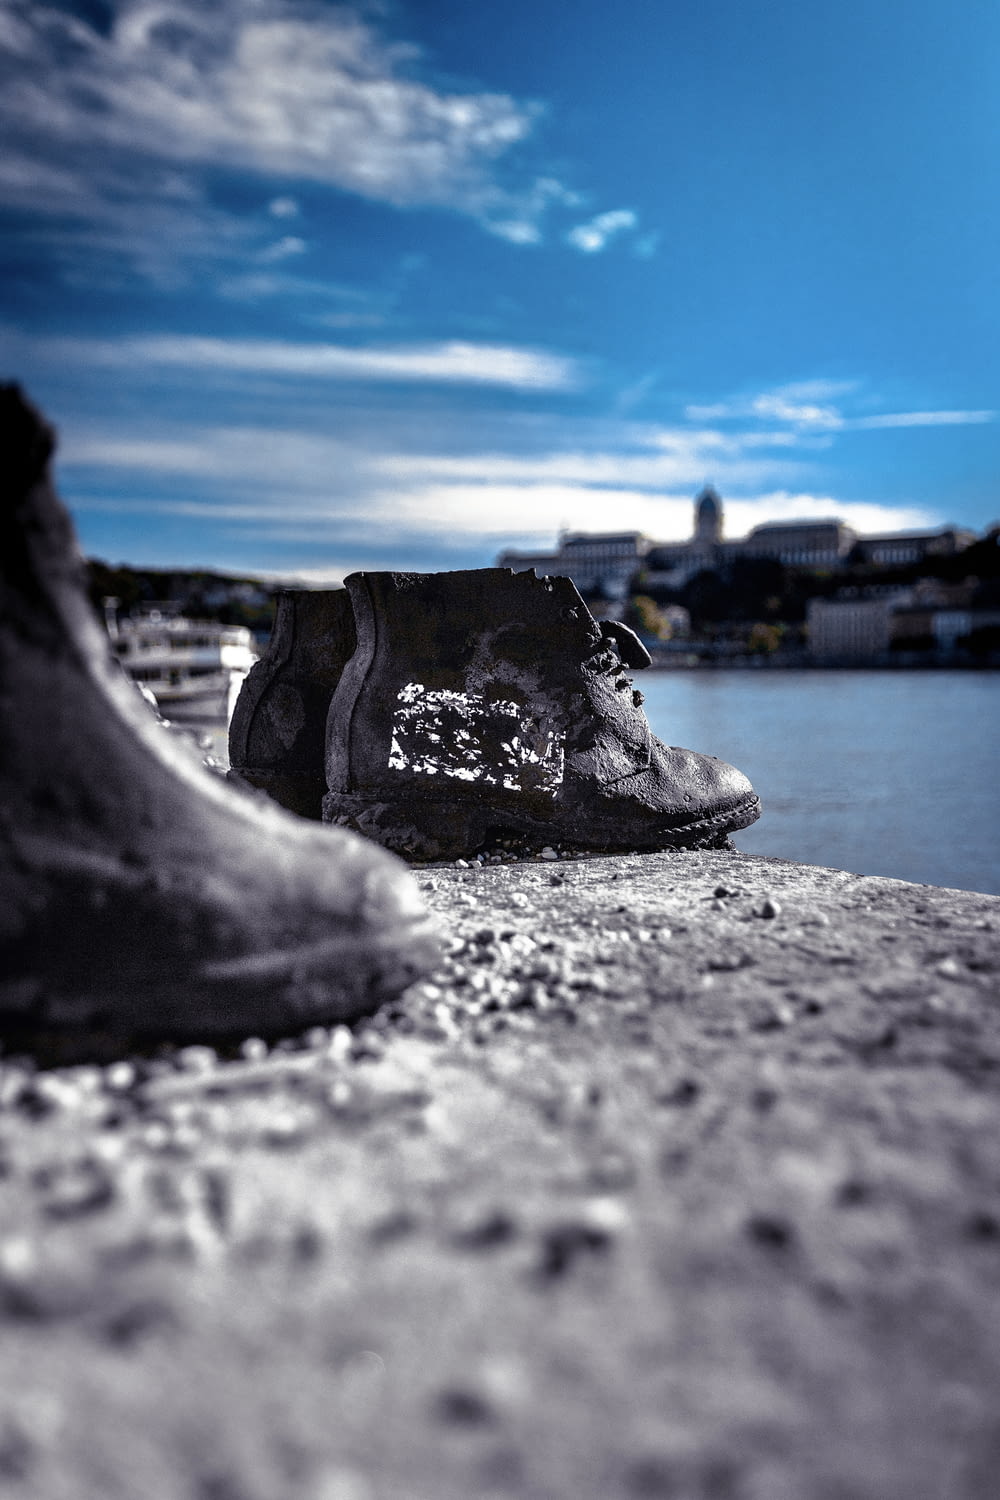 a pair of shoes sitting on the ground next to a body of water